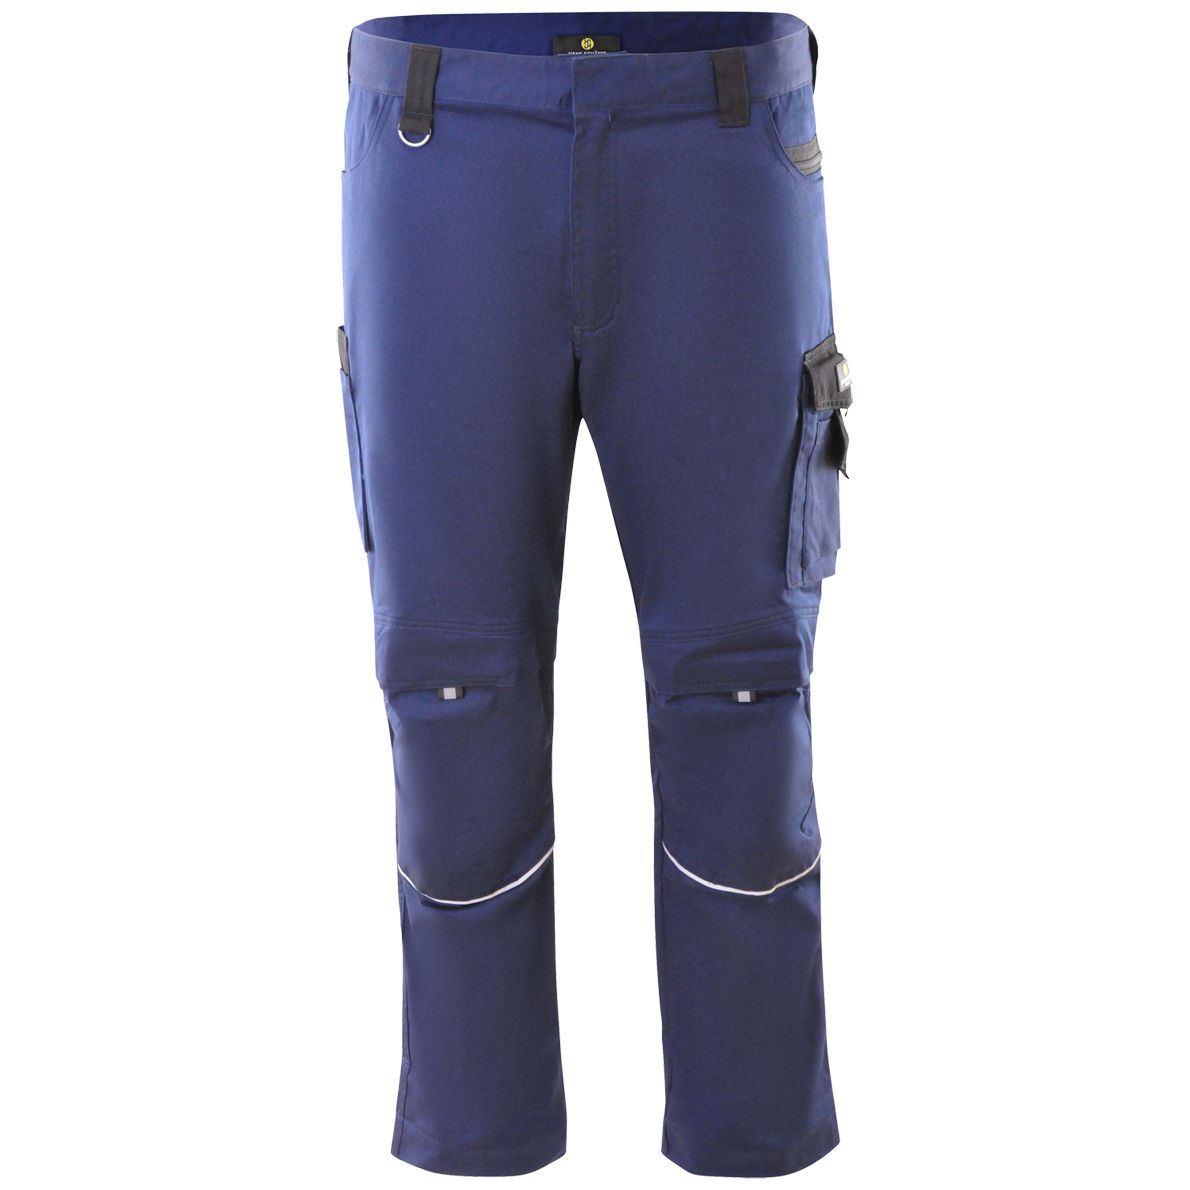 Hans Schäfer work trousers long - Waistband trousers with stretch insert - Cargo trousers for work - Dark blue - 28